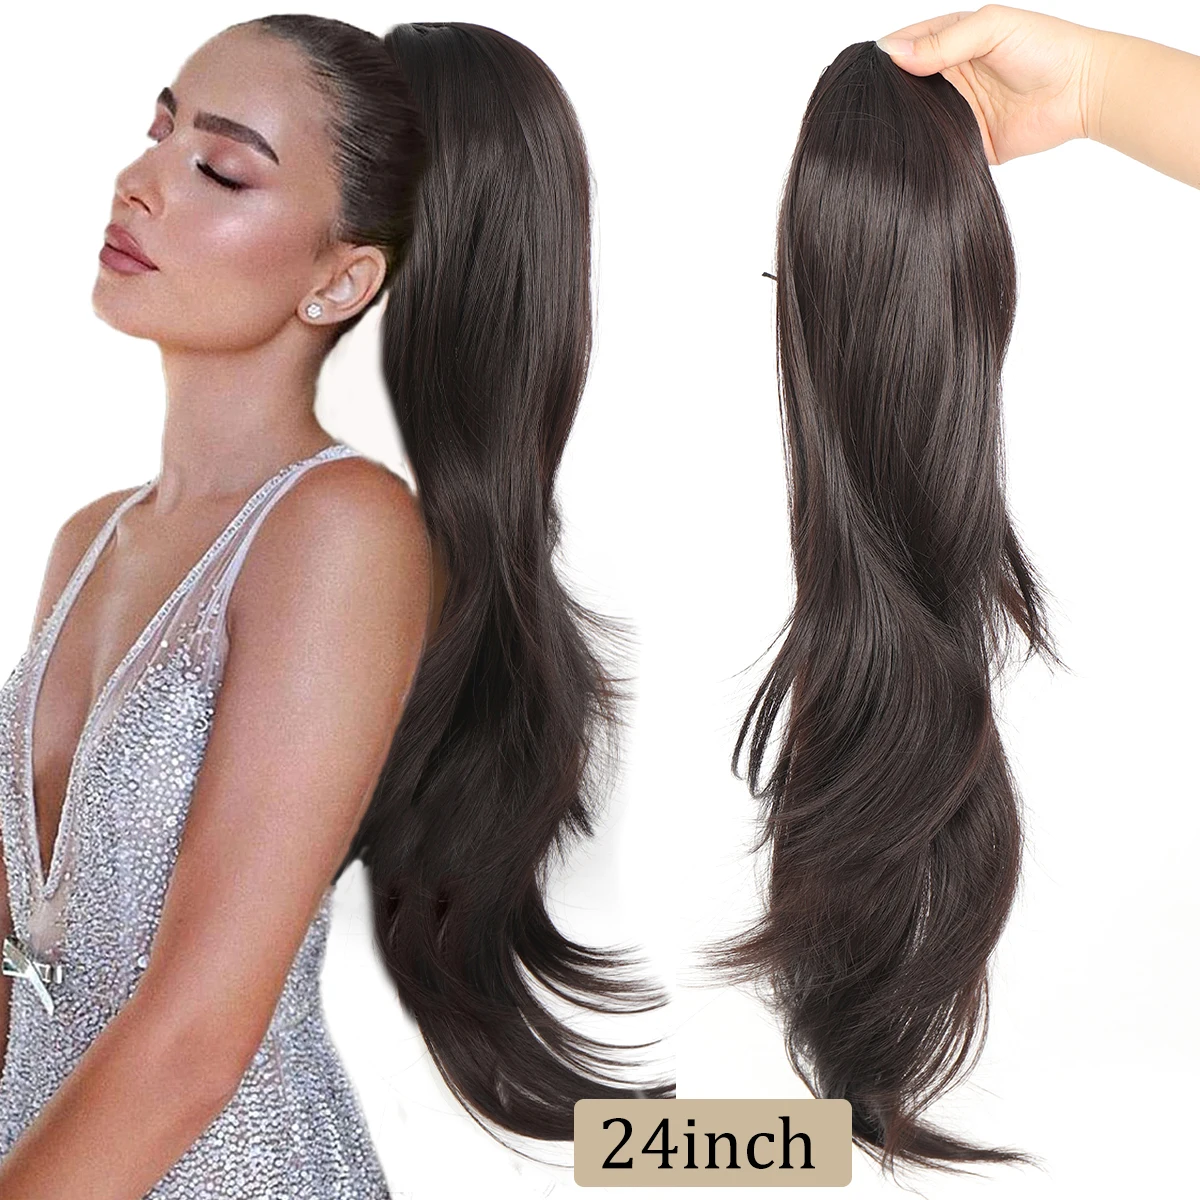 

Dark Brown Ponytail Extension Straight Drawstring Pony Tails Hair Extensions Long 22-26inch Synthetic Fake Ponytails Natural